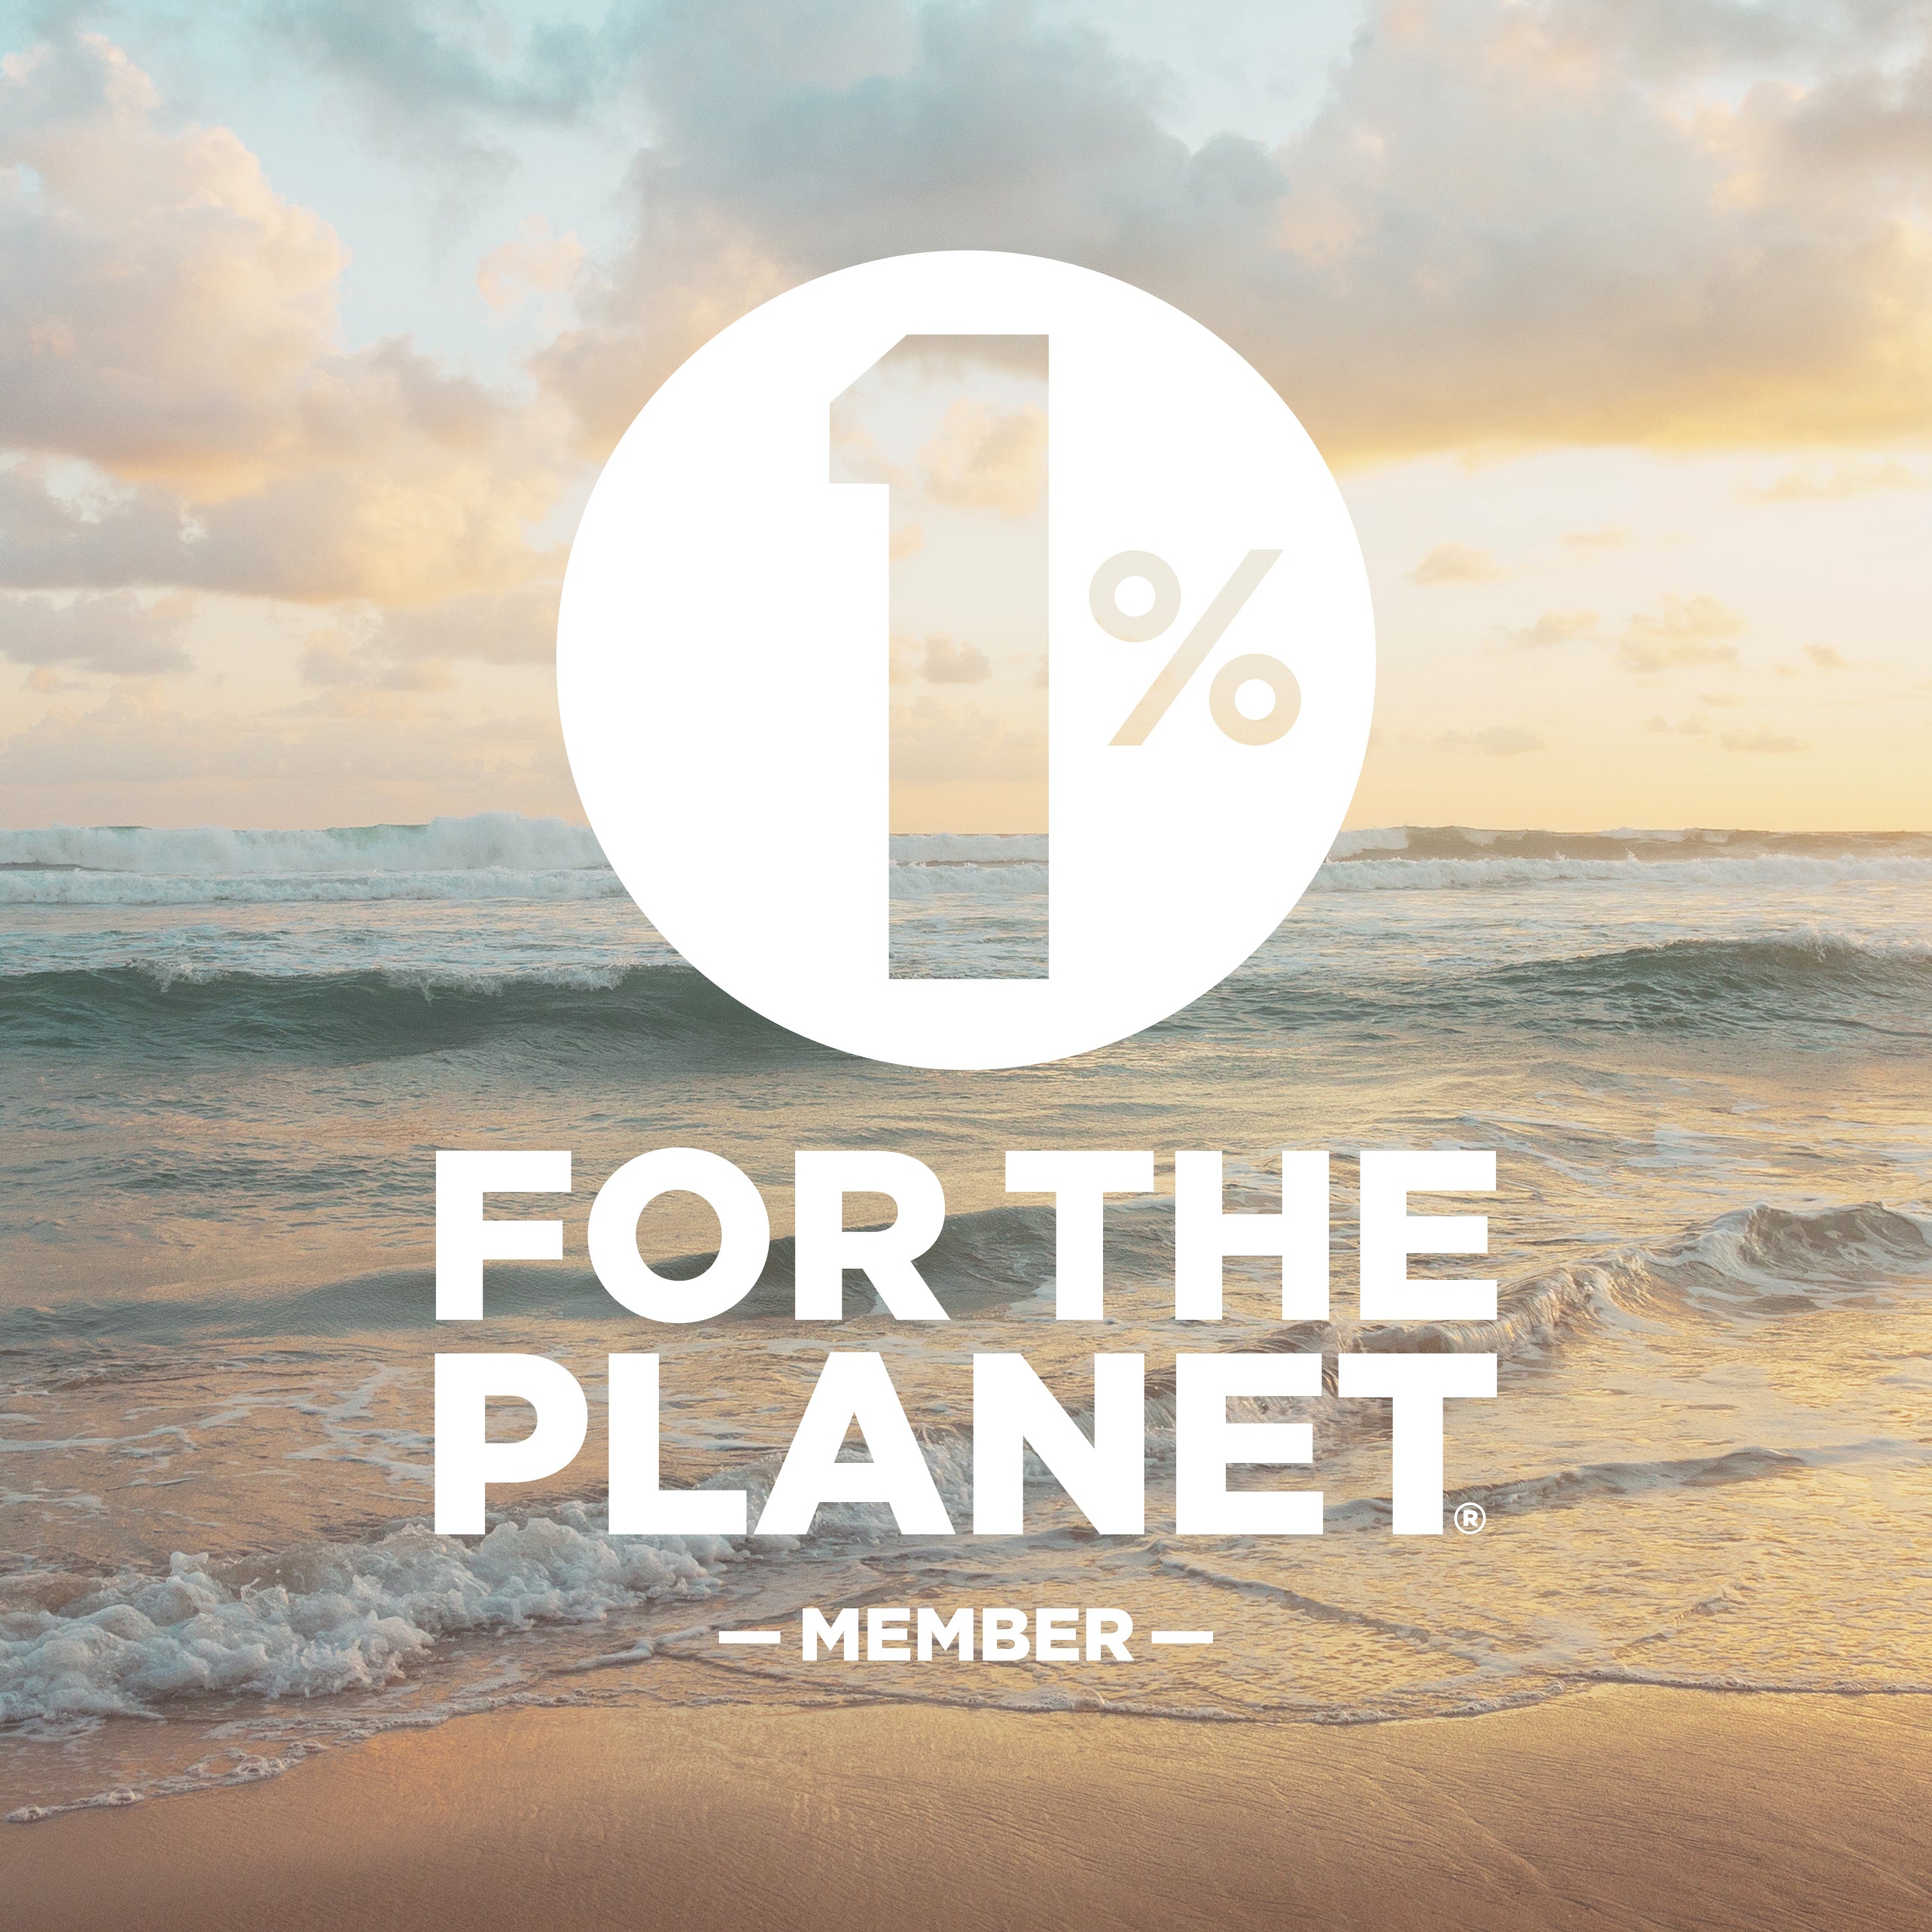 We are a proud member of 1% for the Planet. With each jewelry purchase we give towards environmental causes.